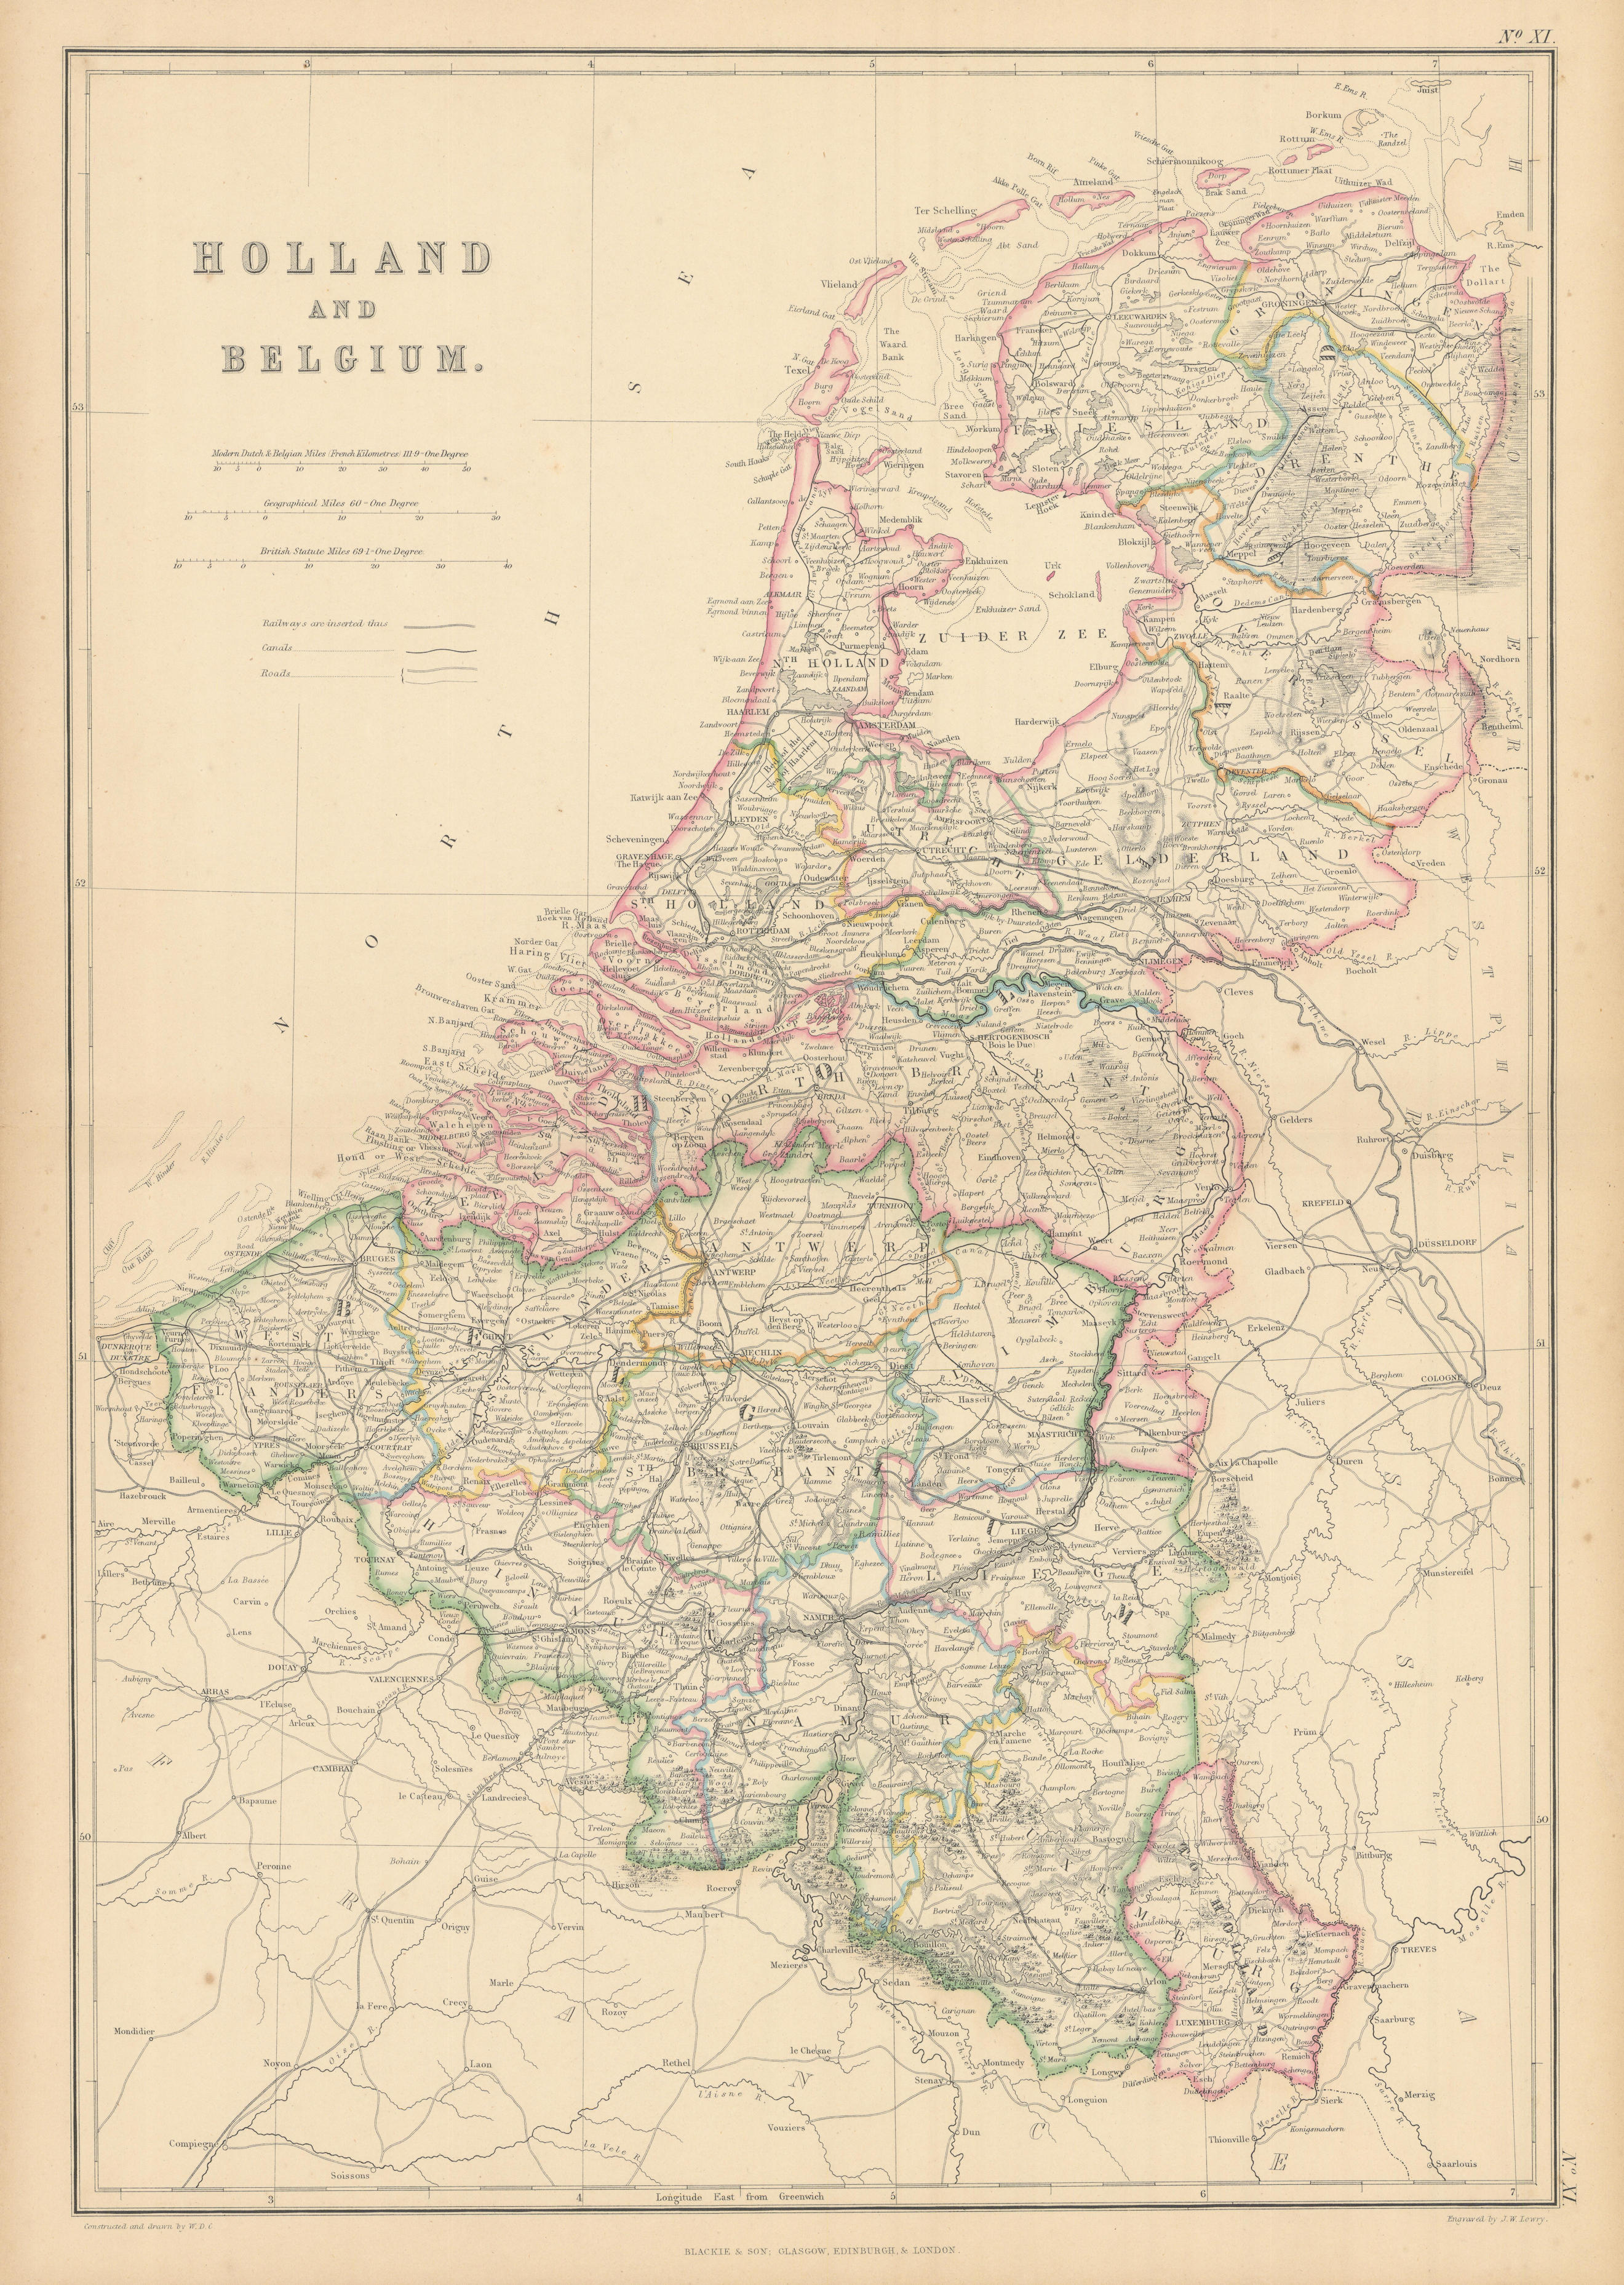 Associate Product Holland and Belgium by Joseph Wilson Lowry. Netherlands 1859 old antique map